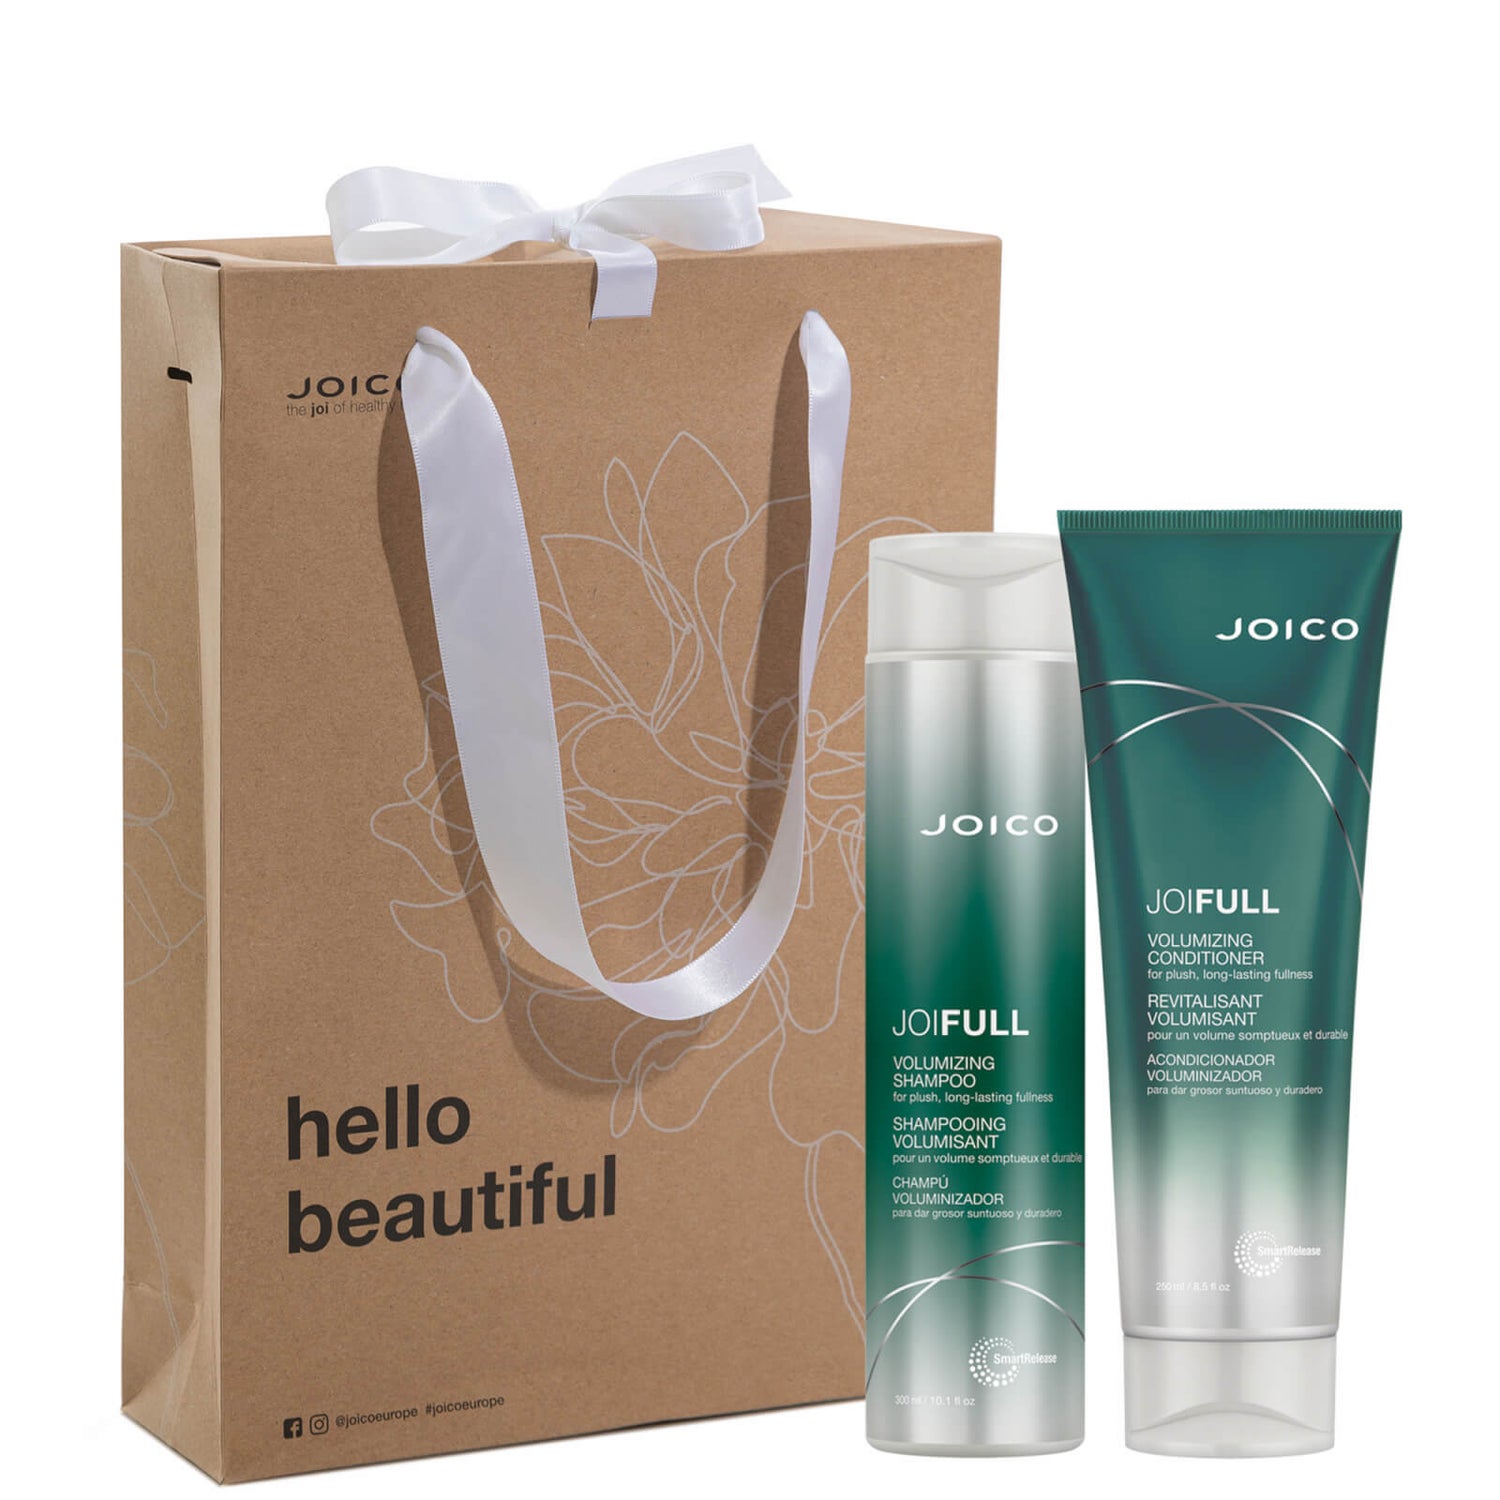 Joico Sparkles and Joi JoiFull Shampoo and Conditioner Set (Worth £37.90)